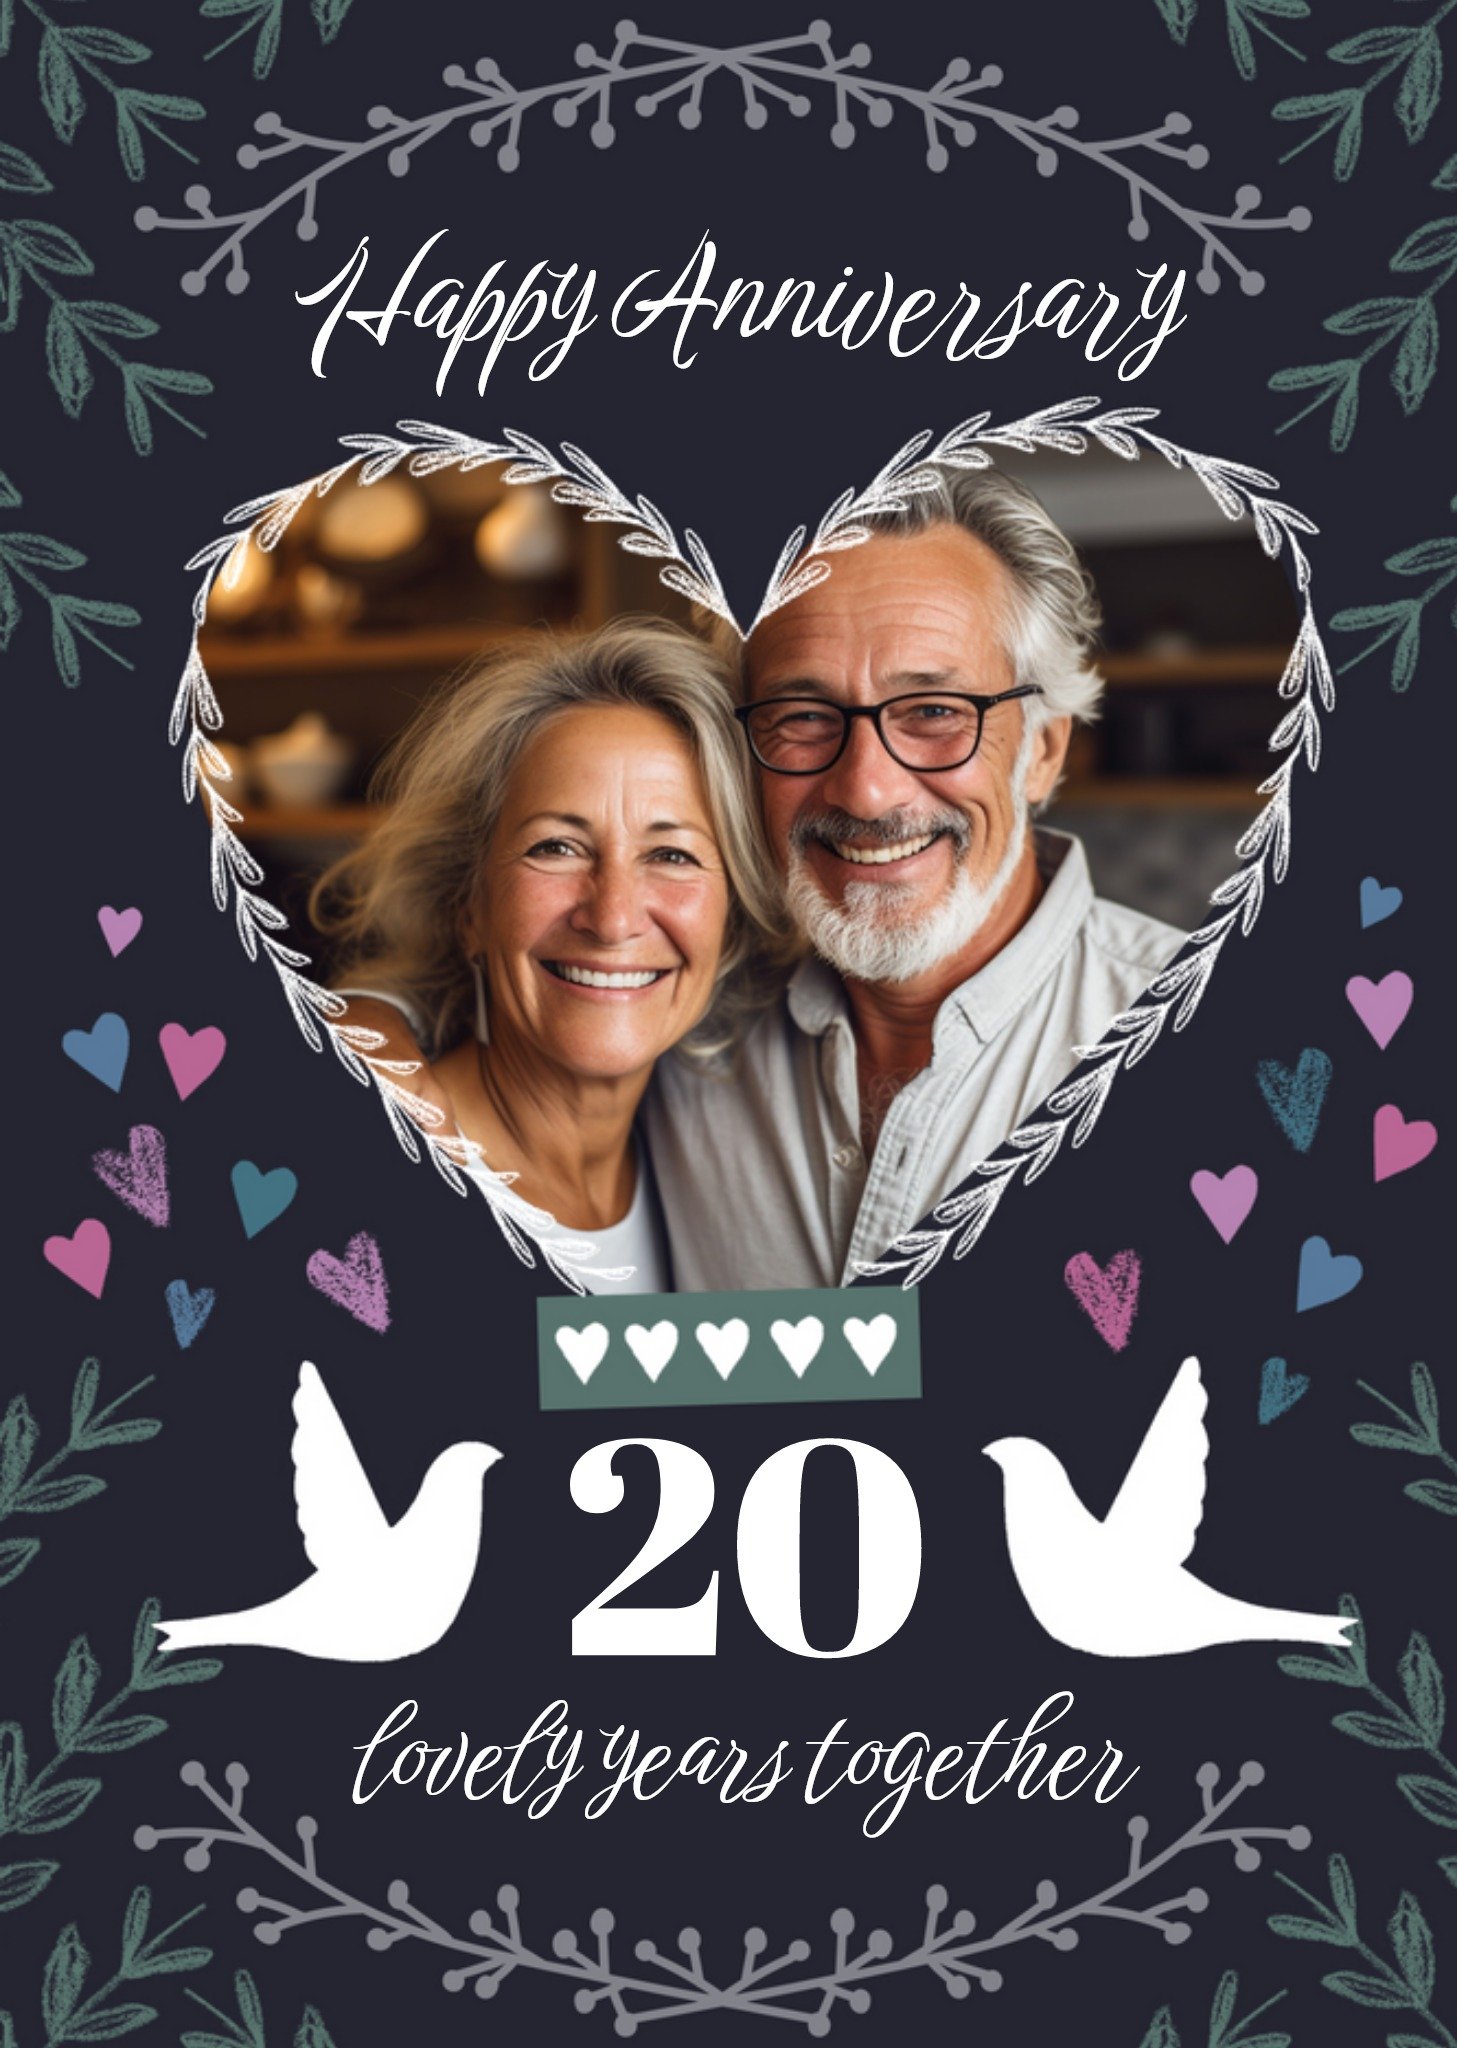 Moonpig Adoring 20 Lovely Years Together Happy Anniversary Card Ecard